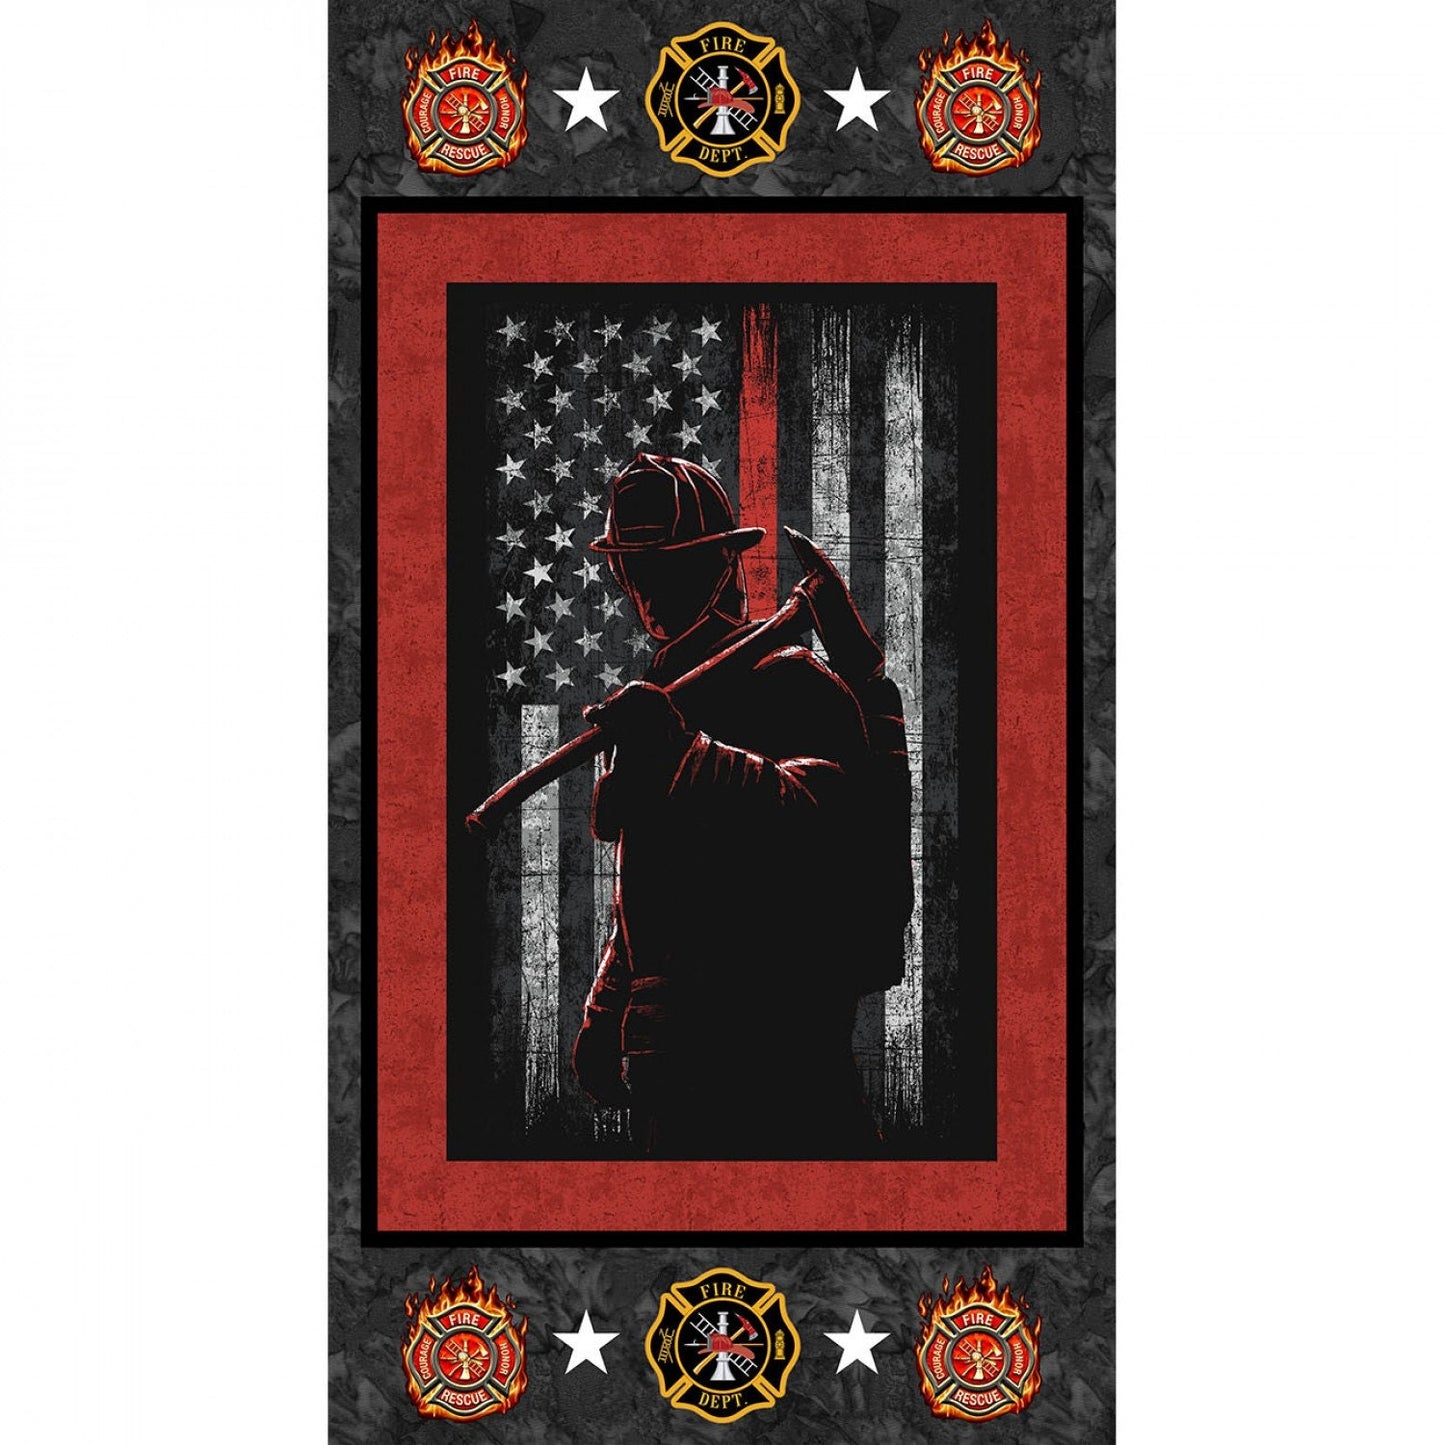 Licensed Military & Public Service 22" Panel Fire Fighters 1195-FF Cotton Woven Panel